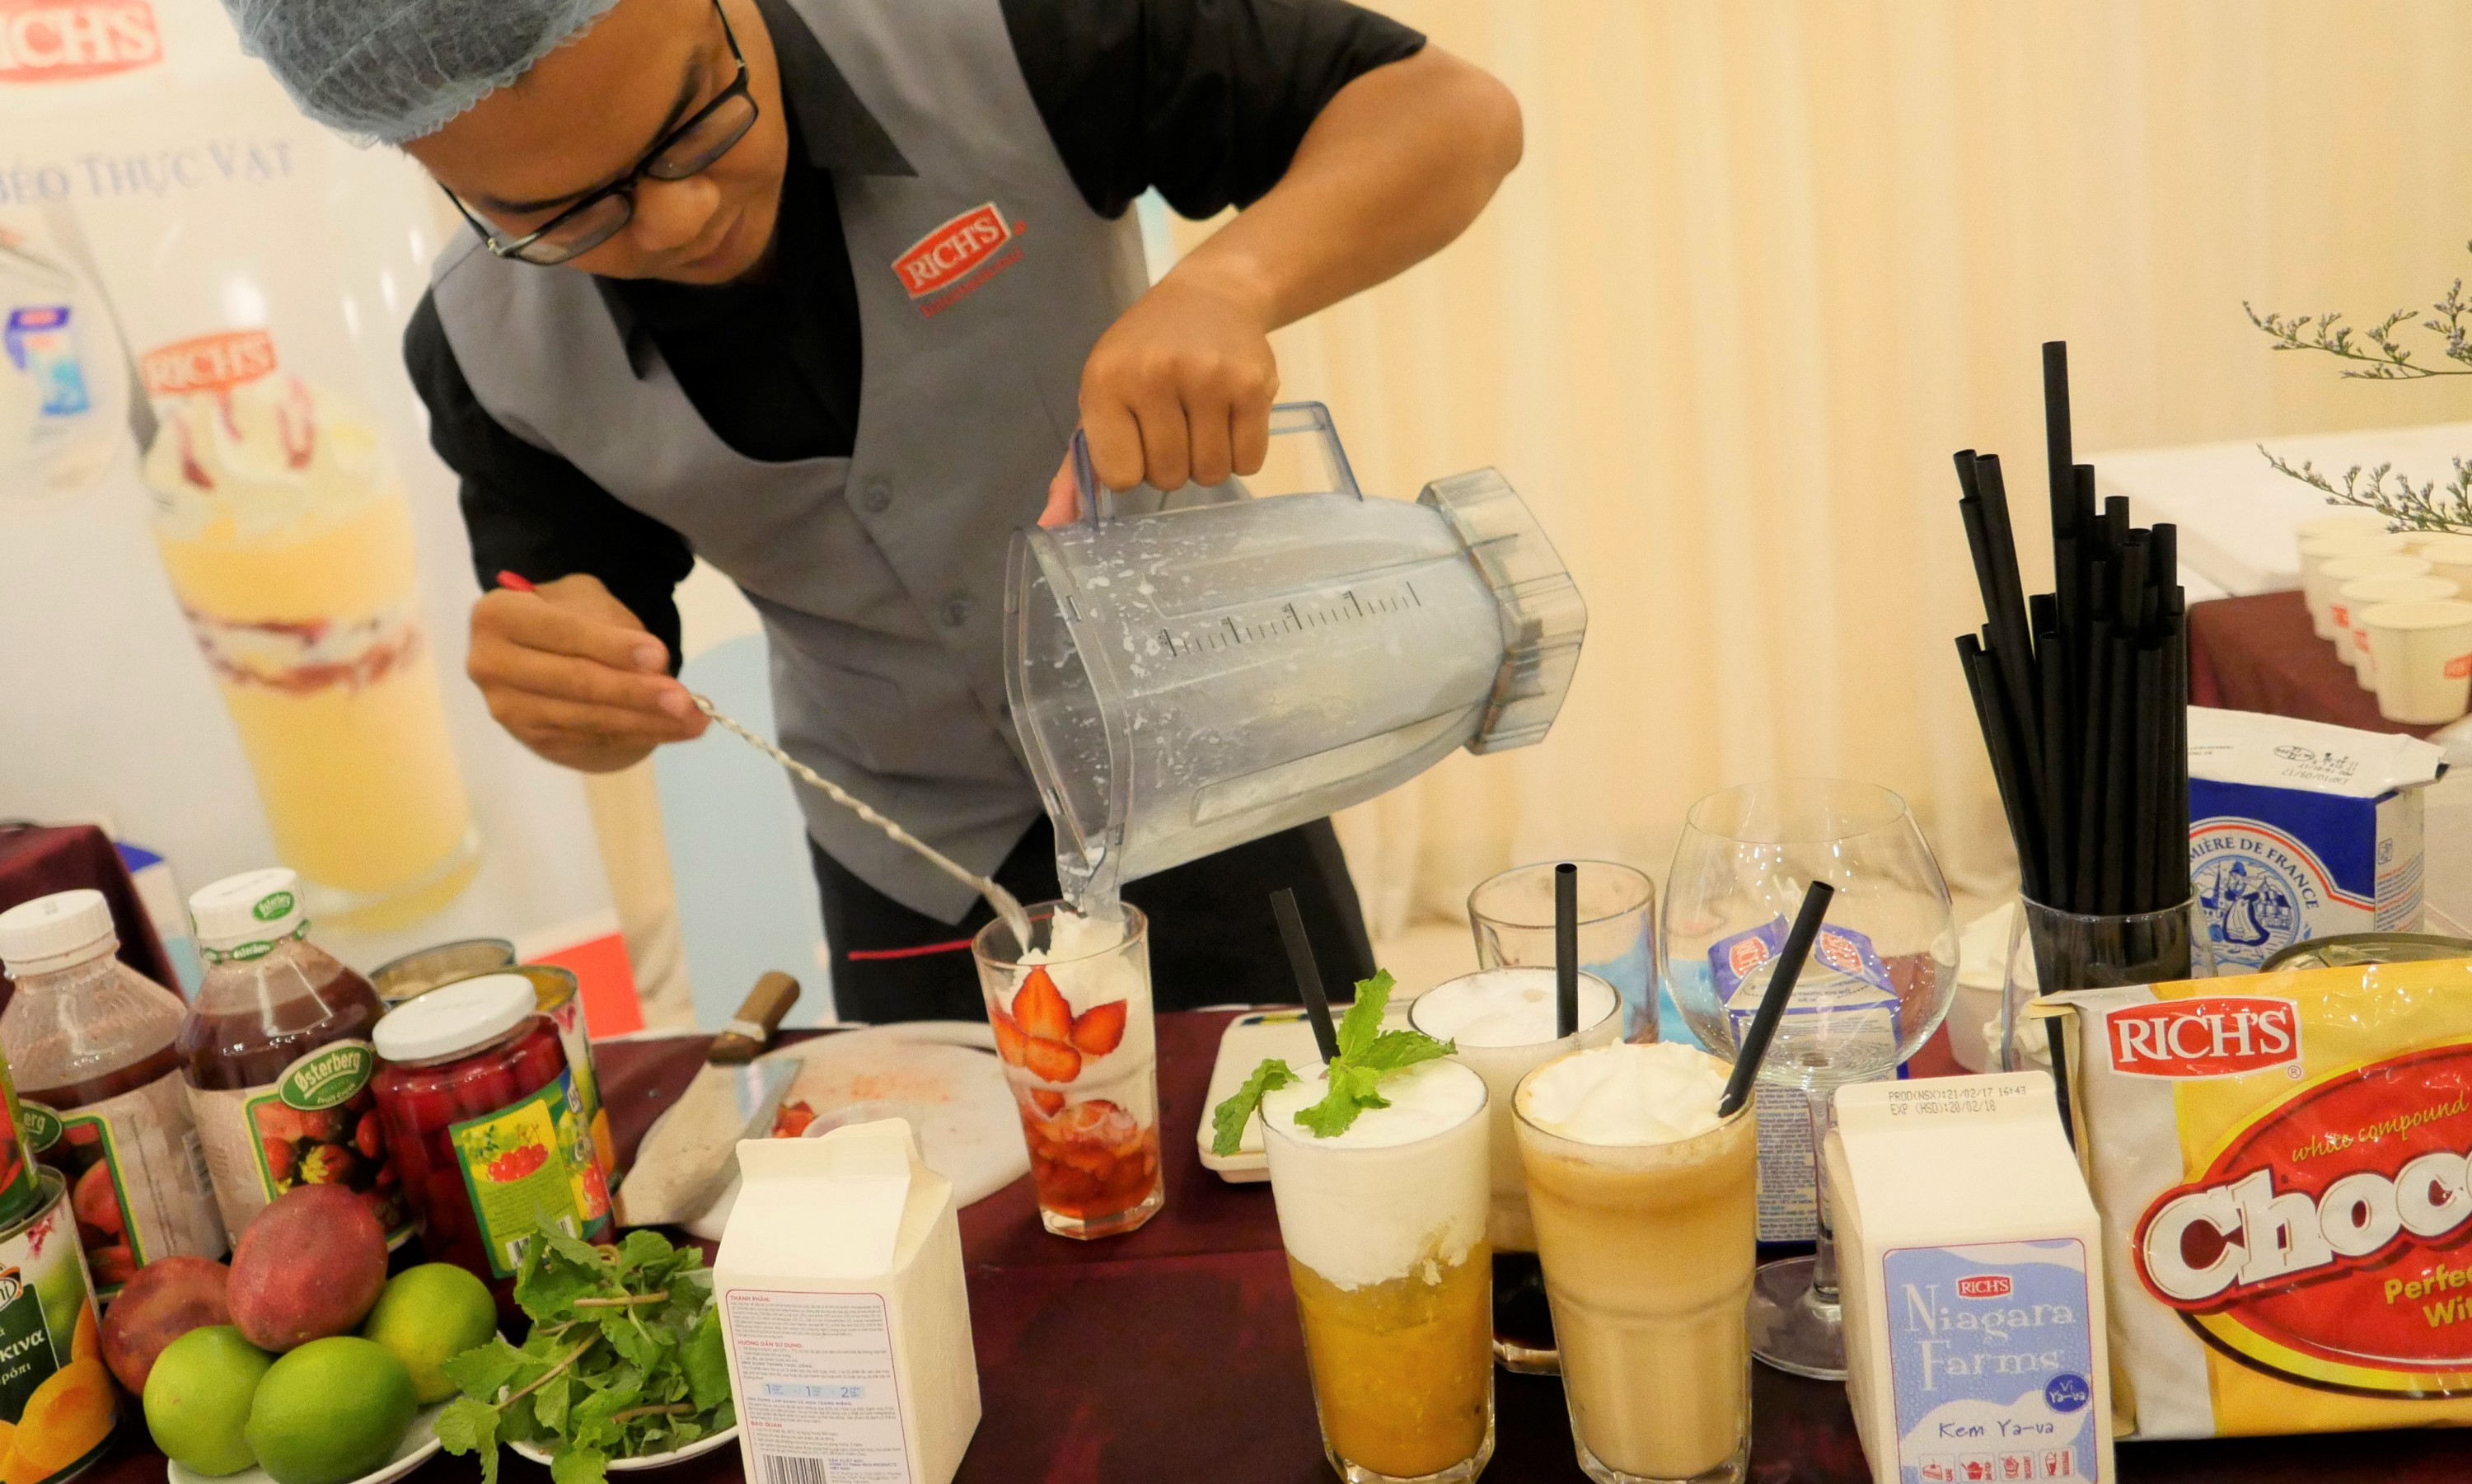 Rich’s Yogurt Topping took over the spotlight at workshop in Phan Thiet